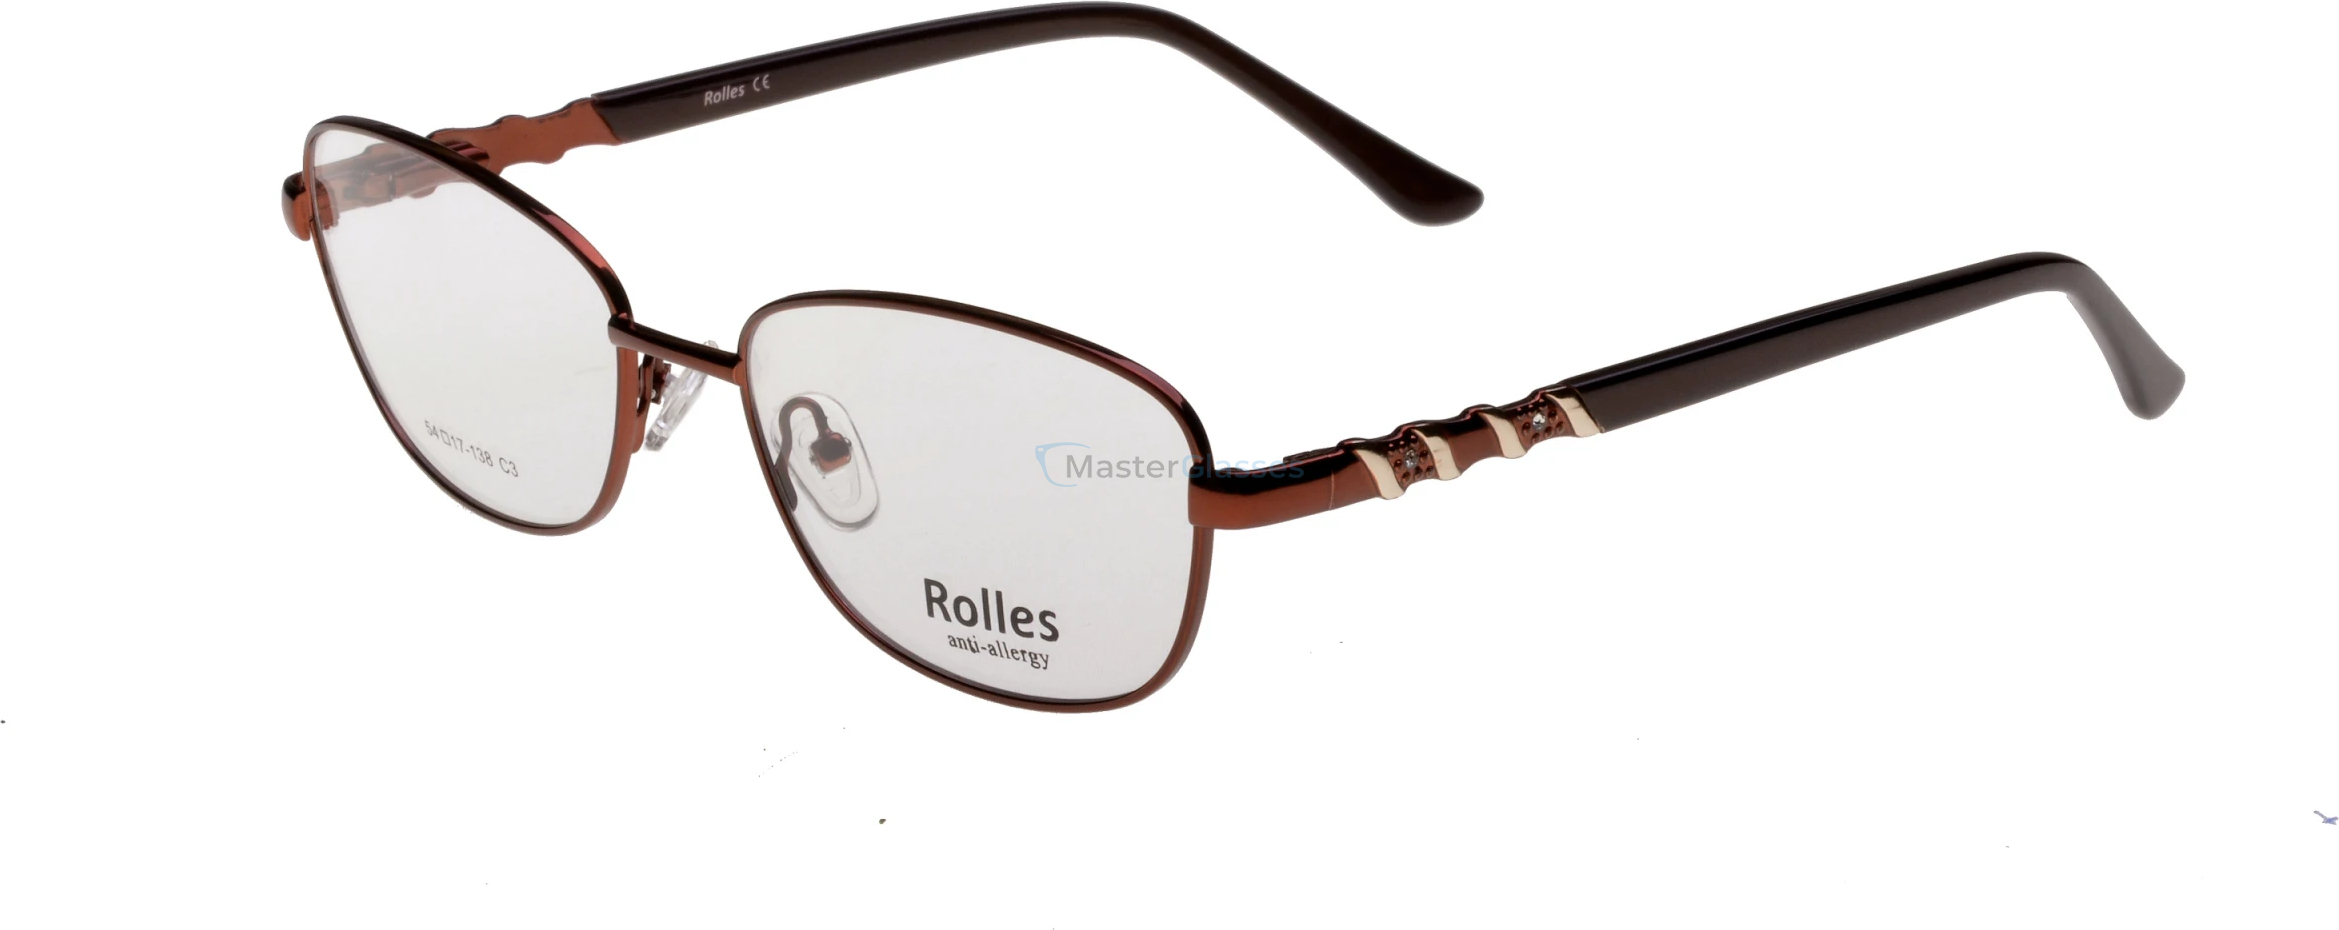  Rolles 349 03